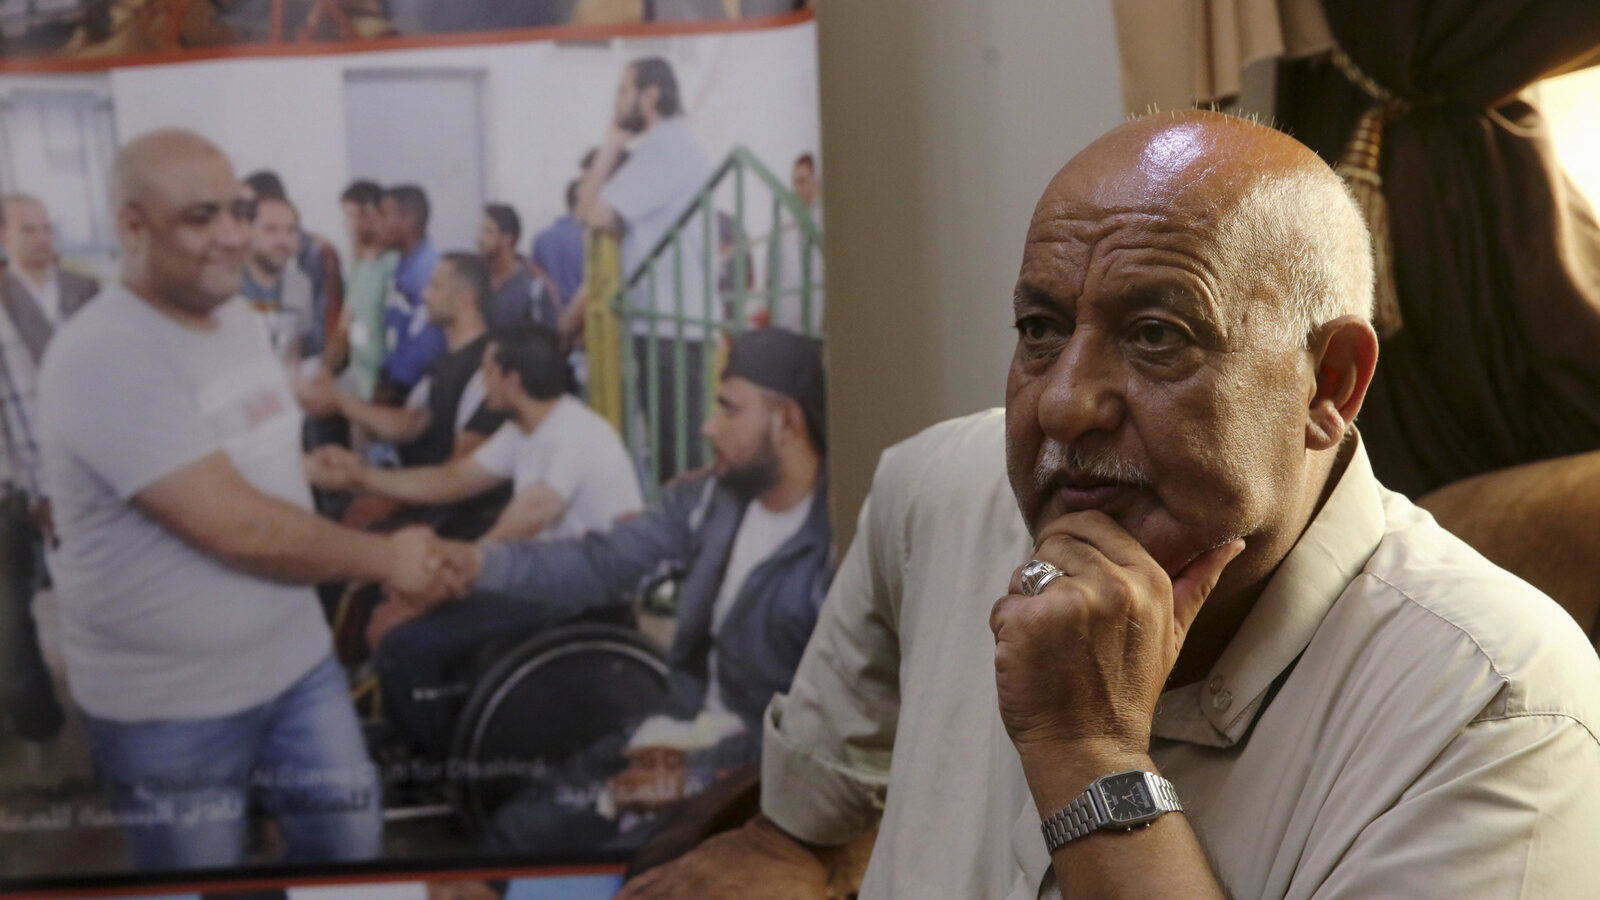 Khalil el-Halabi, 63, the father of Mohammed, Gaza director of the international charity World Vision, who is detained and was tortured by Israeli security for allegedly diverting funds to Hamas. Israel's Shin Bet security agency says el-Halabi confessed to siphoning about $7.2 million a year to Hamas over a period of five years. World Vision says this figure is more than its total budget of $22.5 million over the last decade.